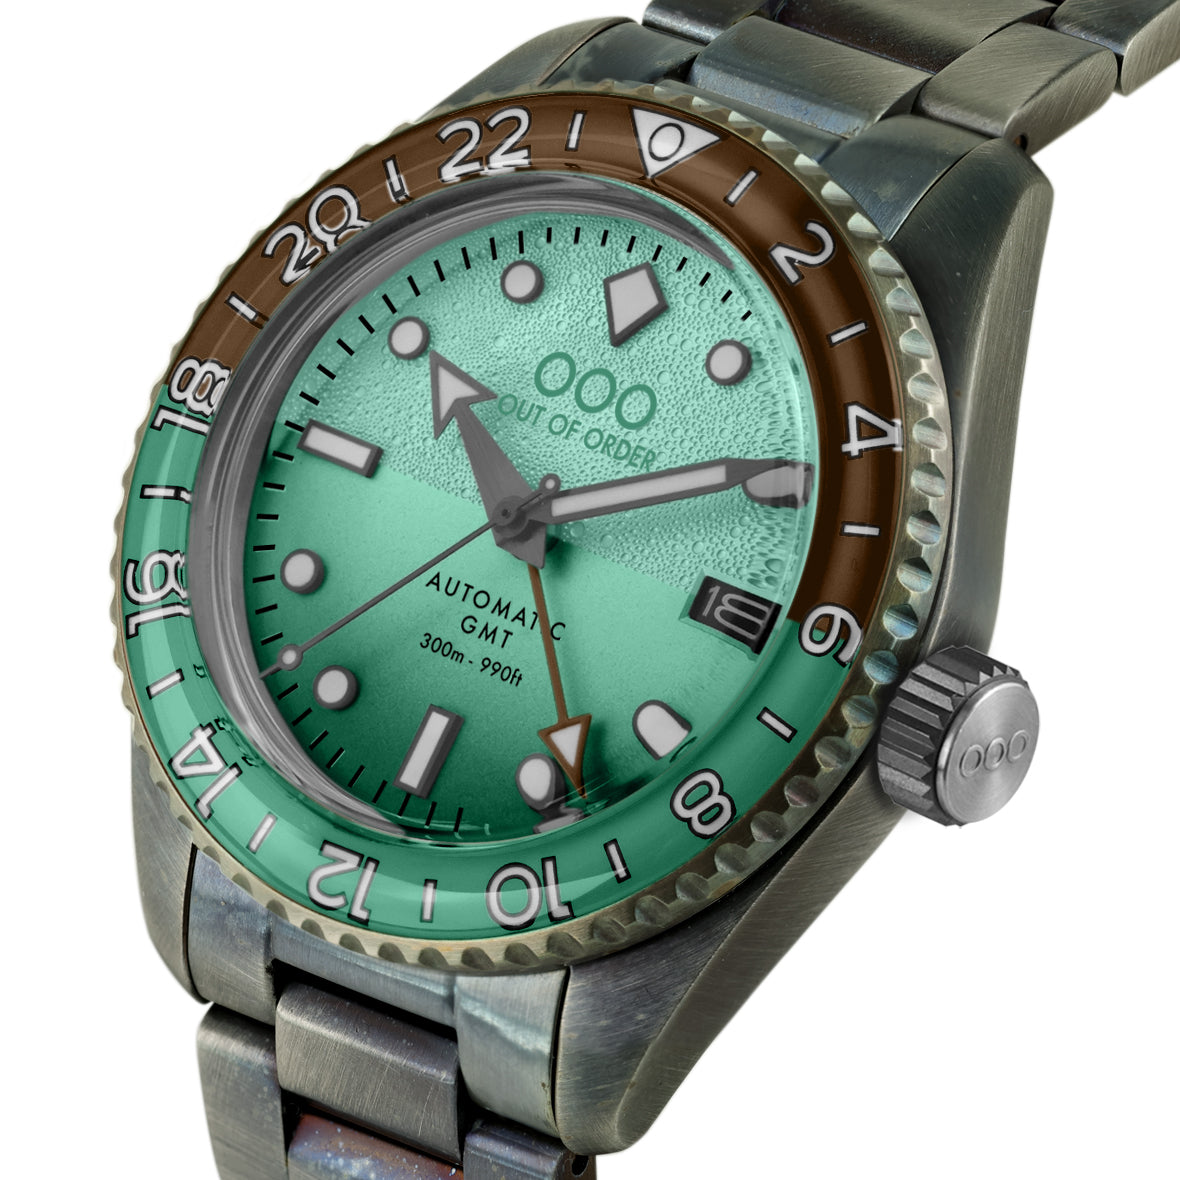 AFTER 8 AUTOMATIC GMT - ULTRA DISTRESSED